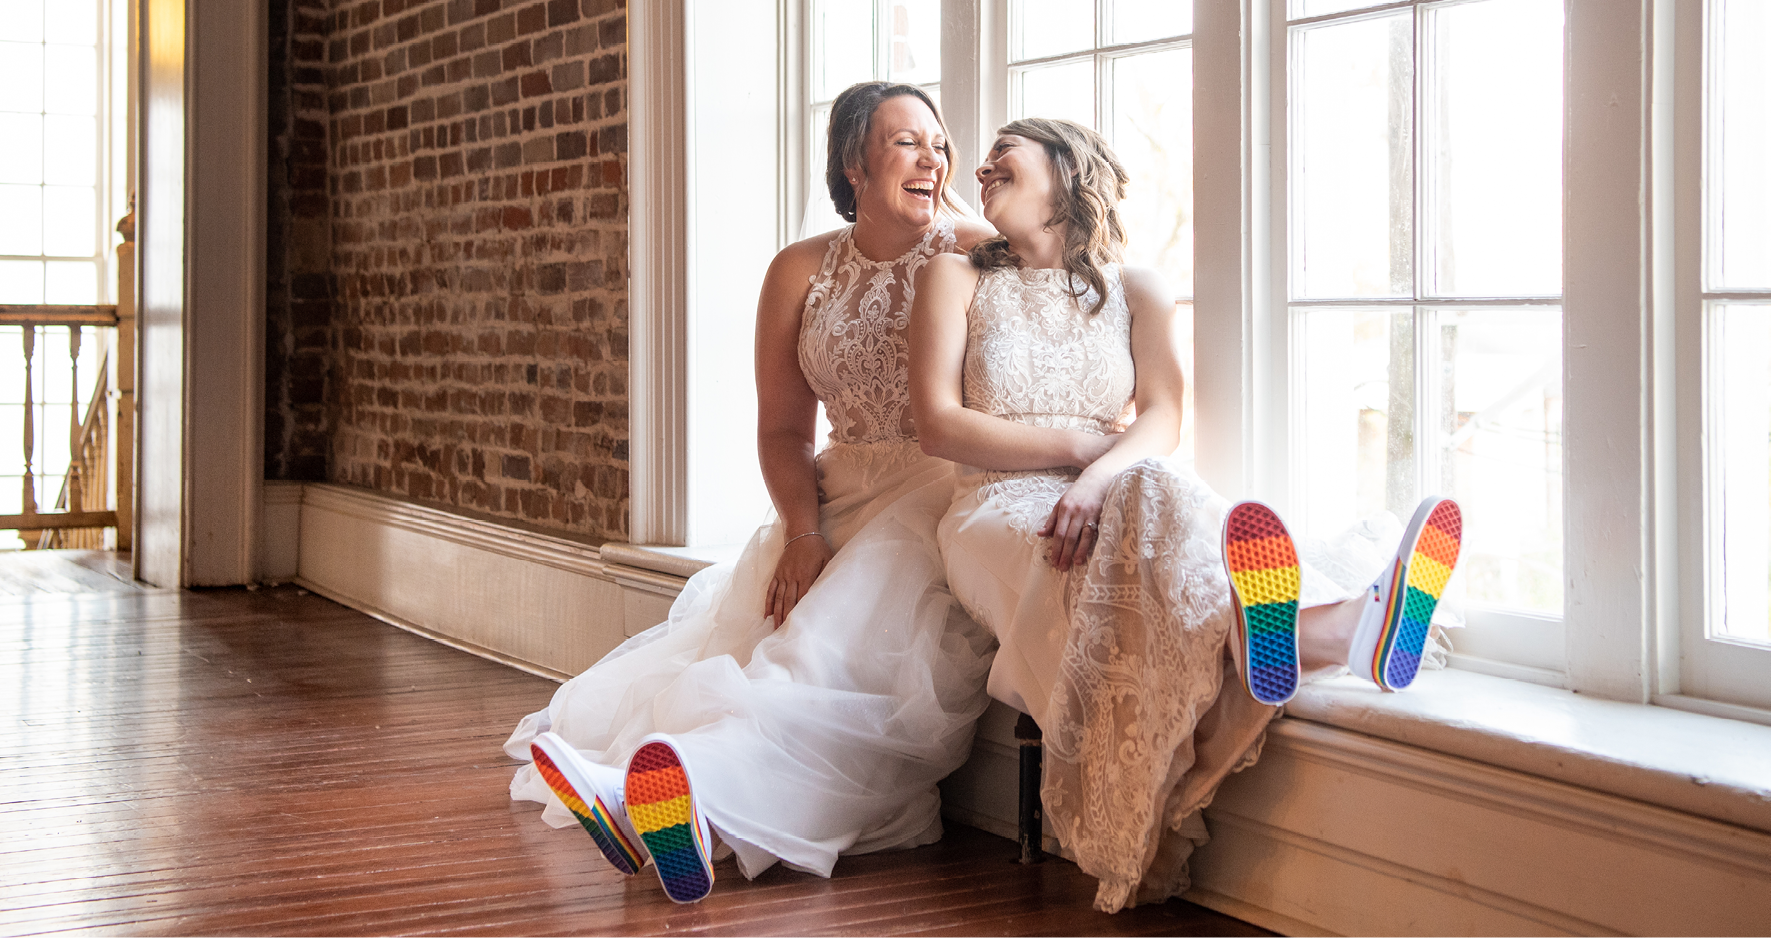 LGBTQ Brides Sitting Together and Wearing Rainbow-Soled Shoes for Pride Wedding Idea